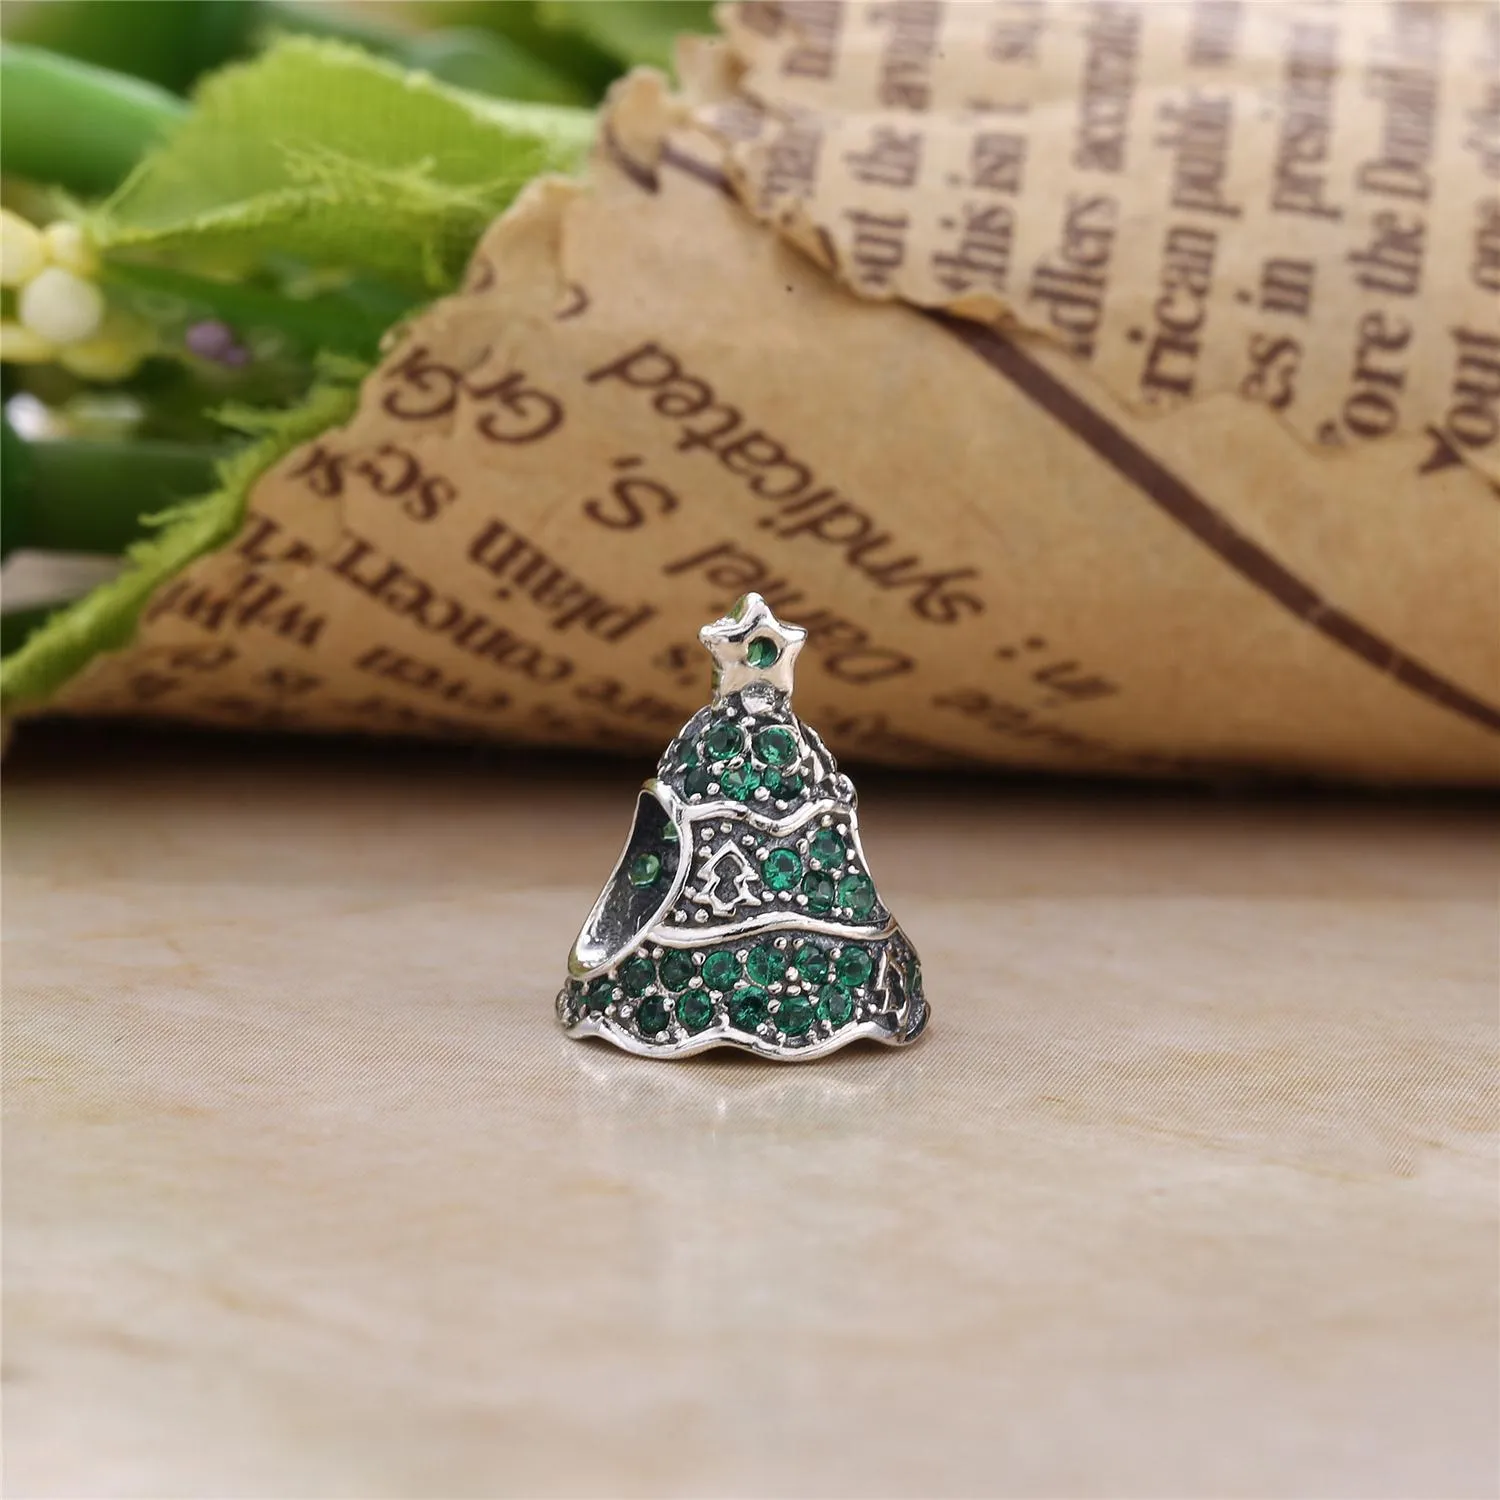 Christmas tree silver charm with clear cubic zirconia - 791765CZ